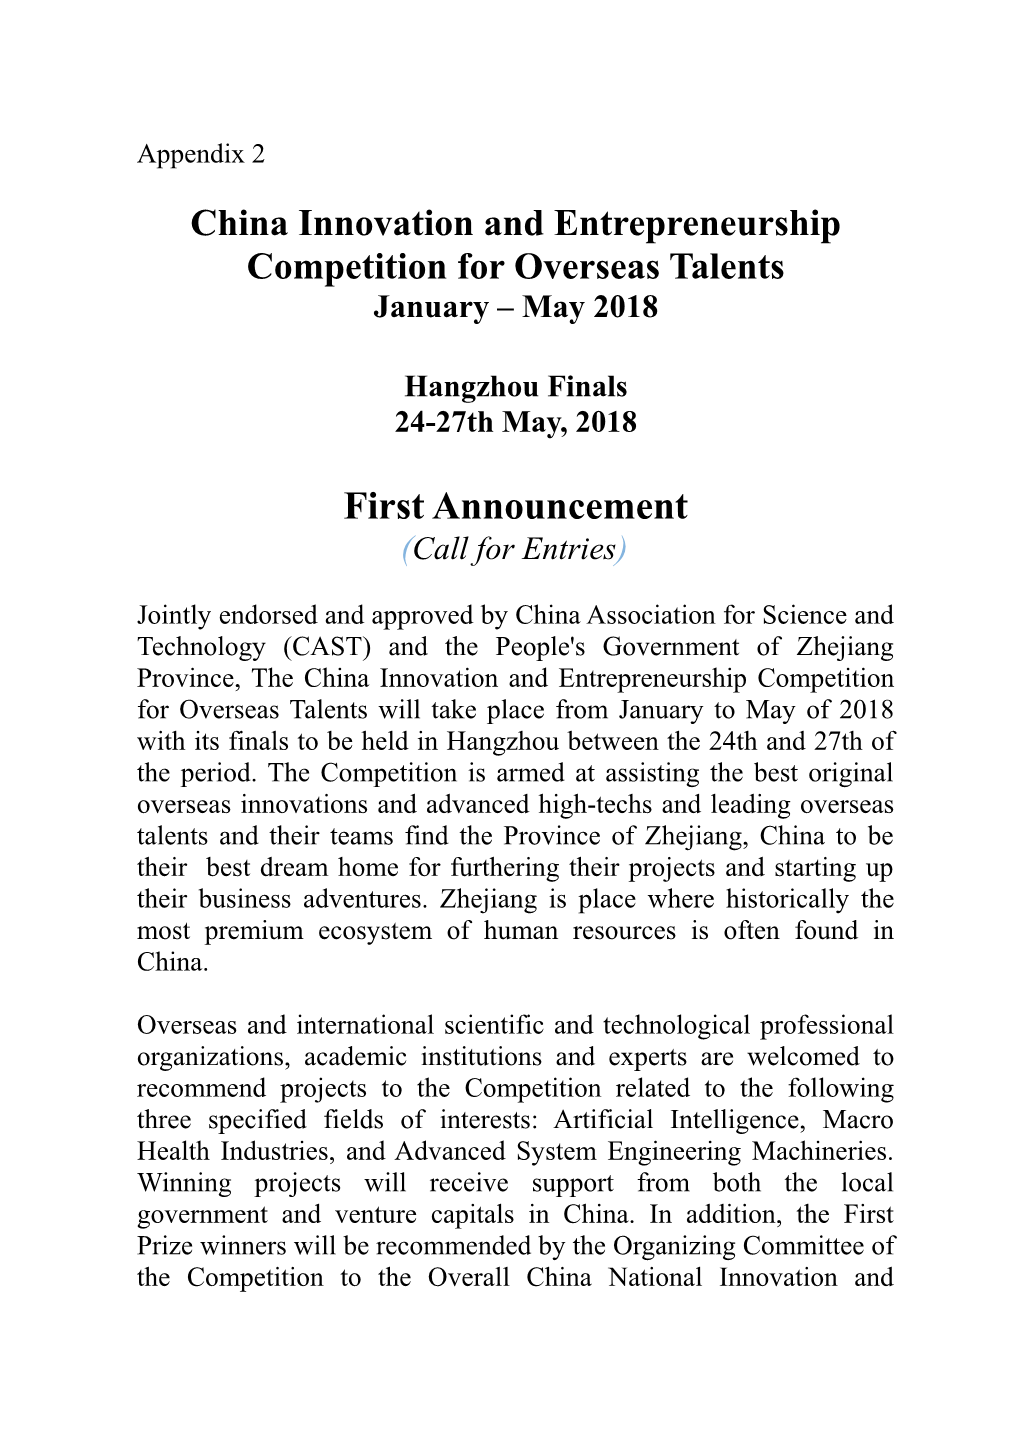 China Innovation and Entrepreneurship Competition for Overseas Talents